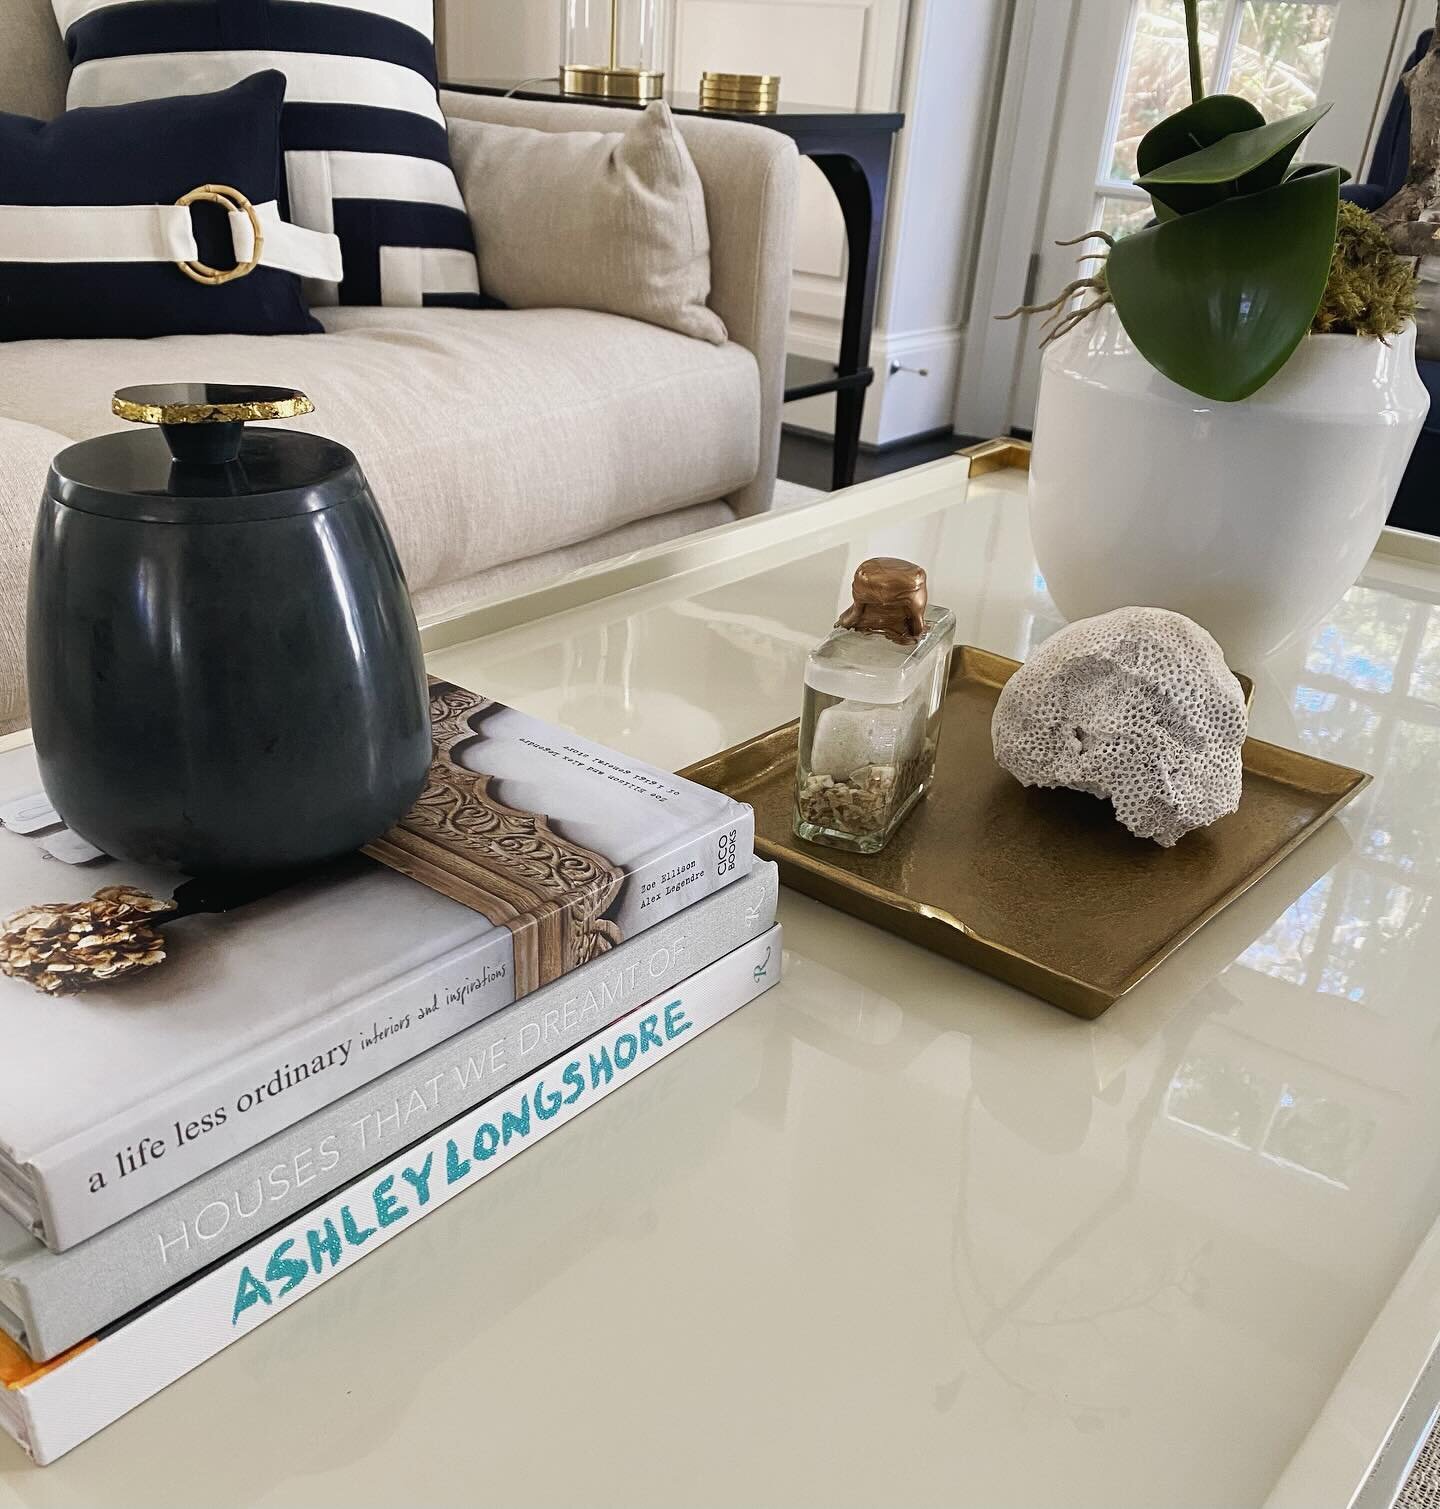 ❕DESIGN TIP❕
Coffee table decor can easily look crowded. It&rsquo;s all about the placement.
.
.
.
#interiordecor #coffeetable #coffeetabledecor #tabledecor #interiordesign #interiorphilosophy #interiorphilosophyatl #atlantadesigners